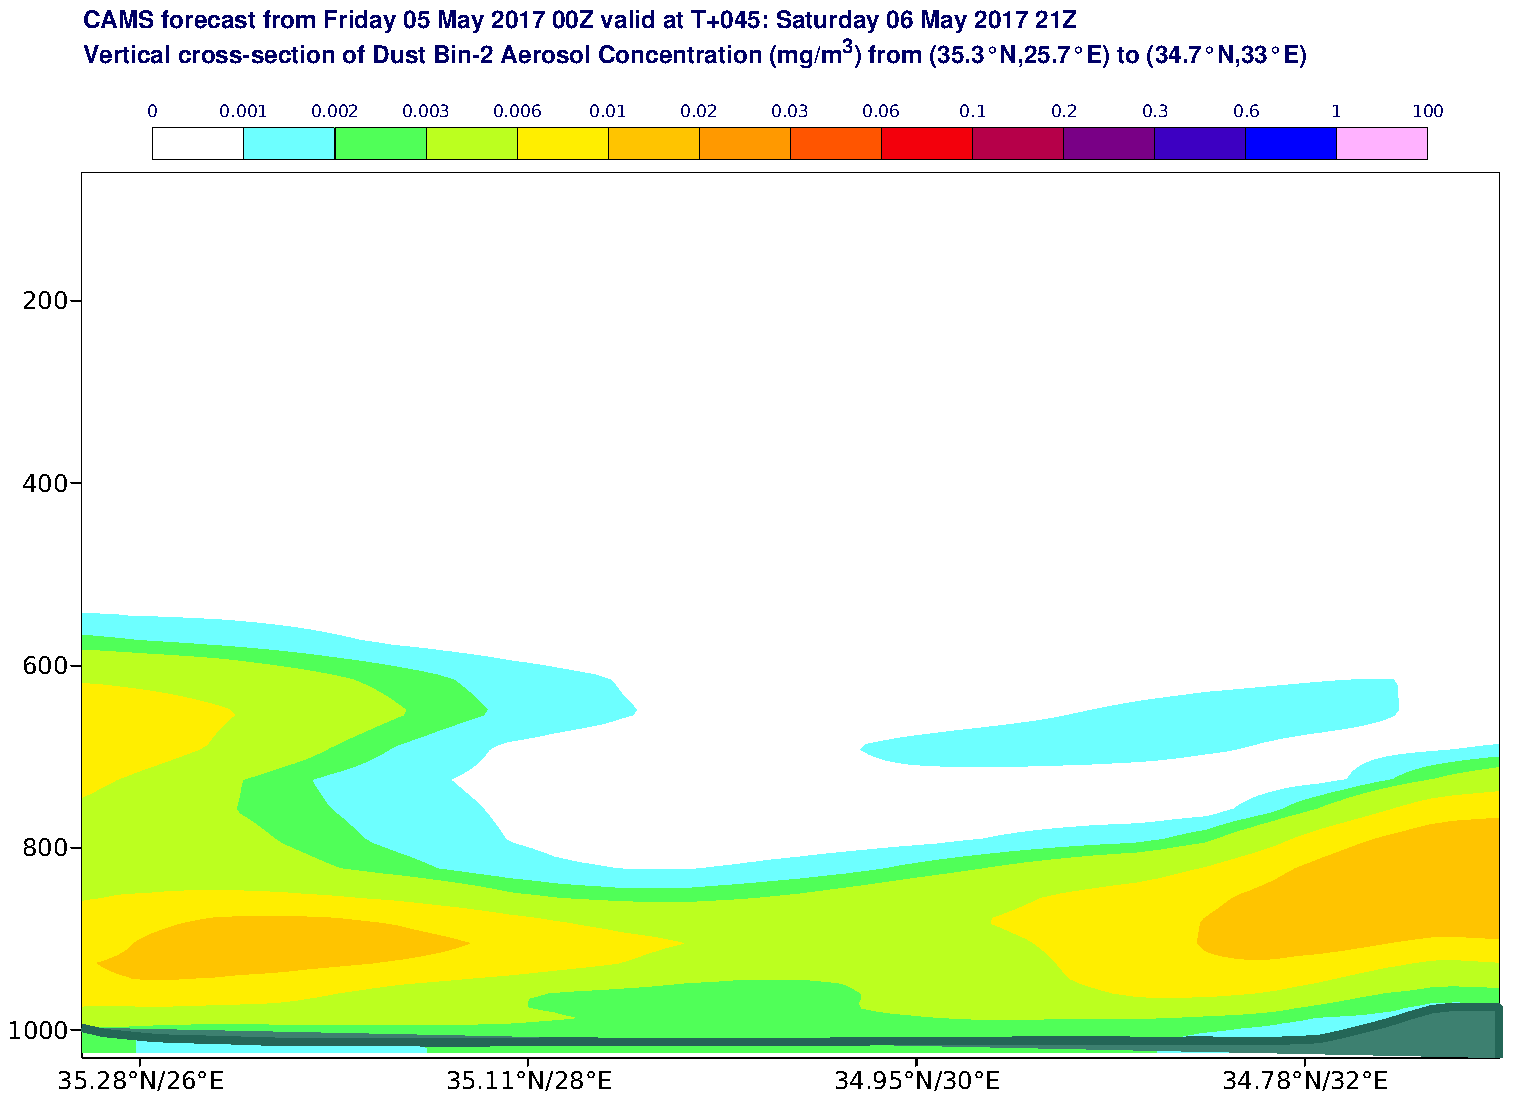 Vertical cross-section of Dust Bin-2 Aerosol Concentration (mg/m3) valid at T45 - 2017-05-06 21:00